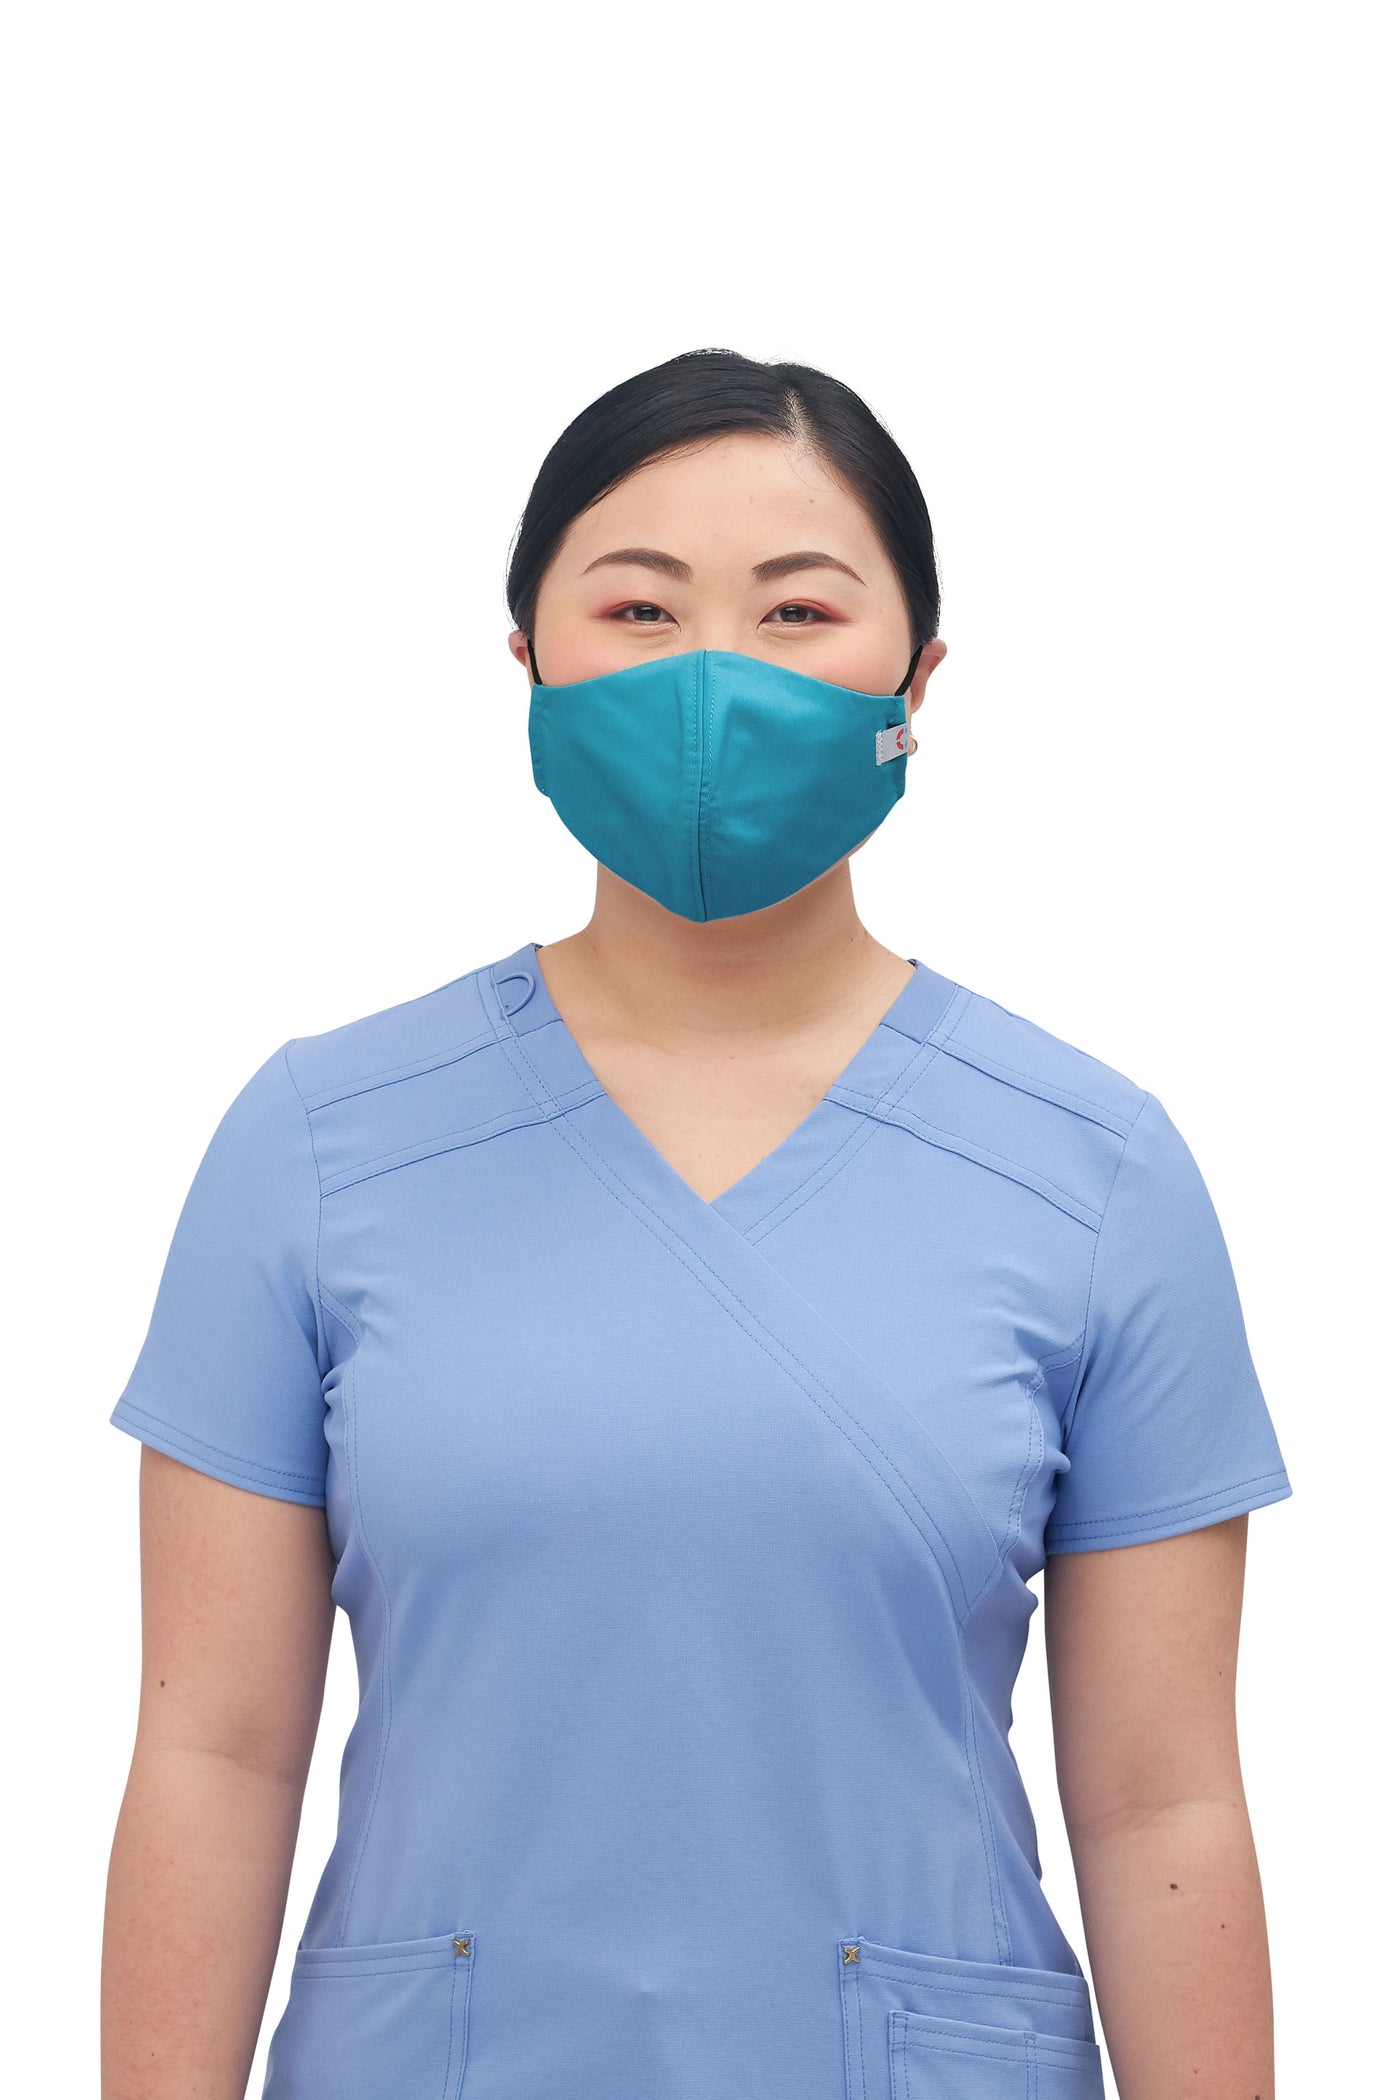 Teal Blue - Cherokee Workwear Revolution Tech Face Covering (Pack Of 5)